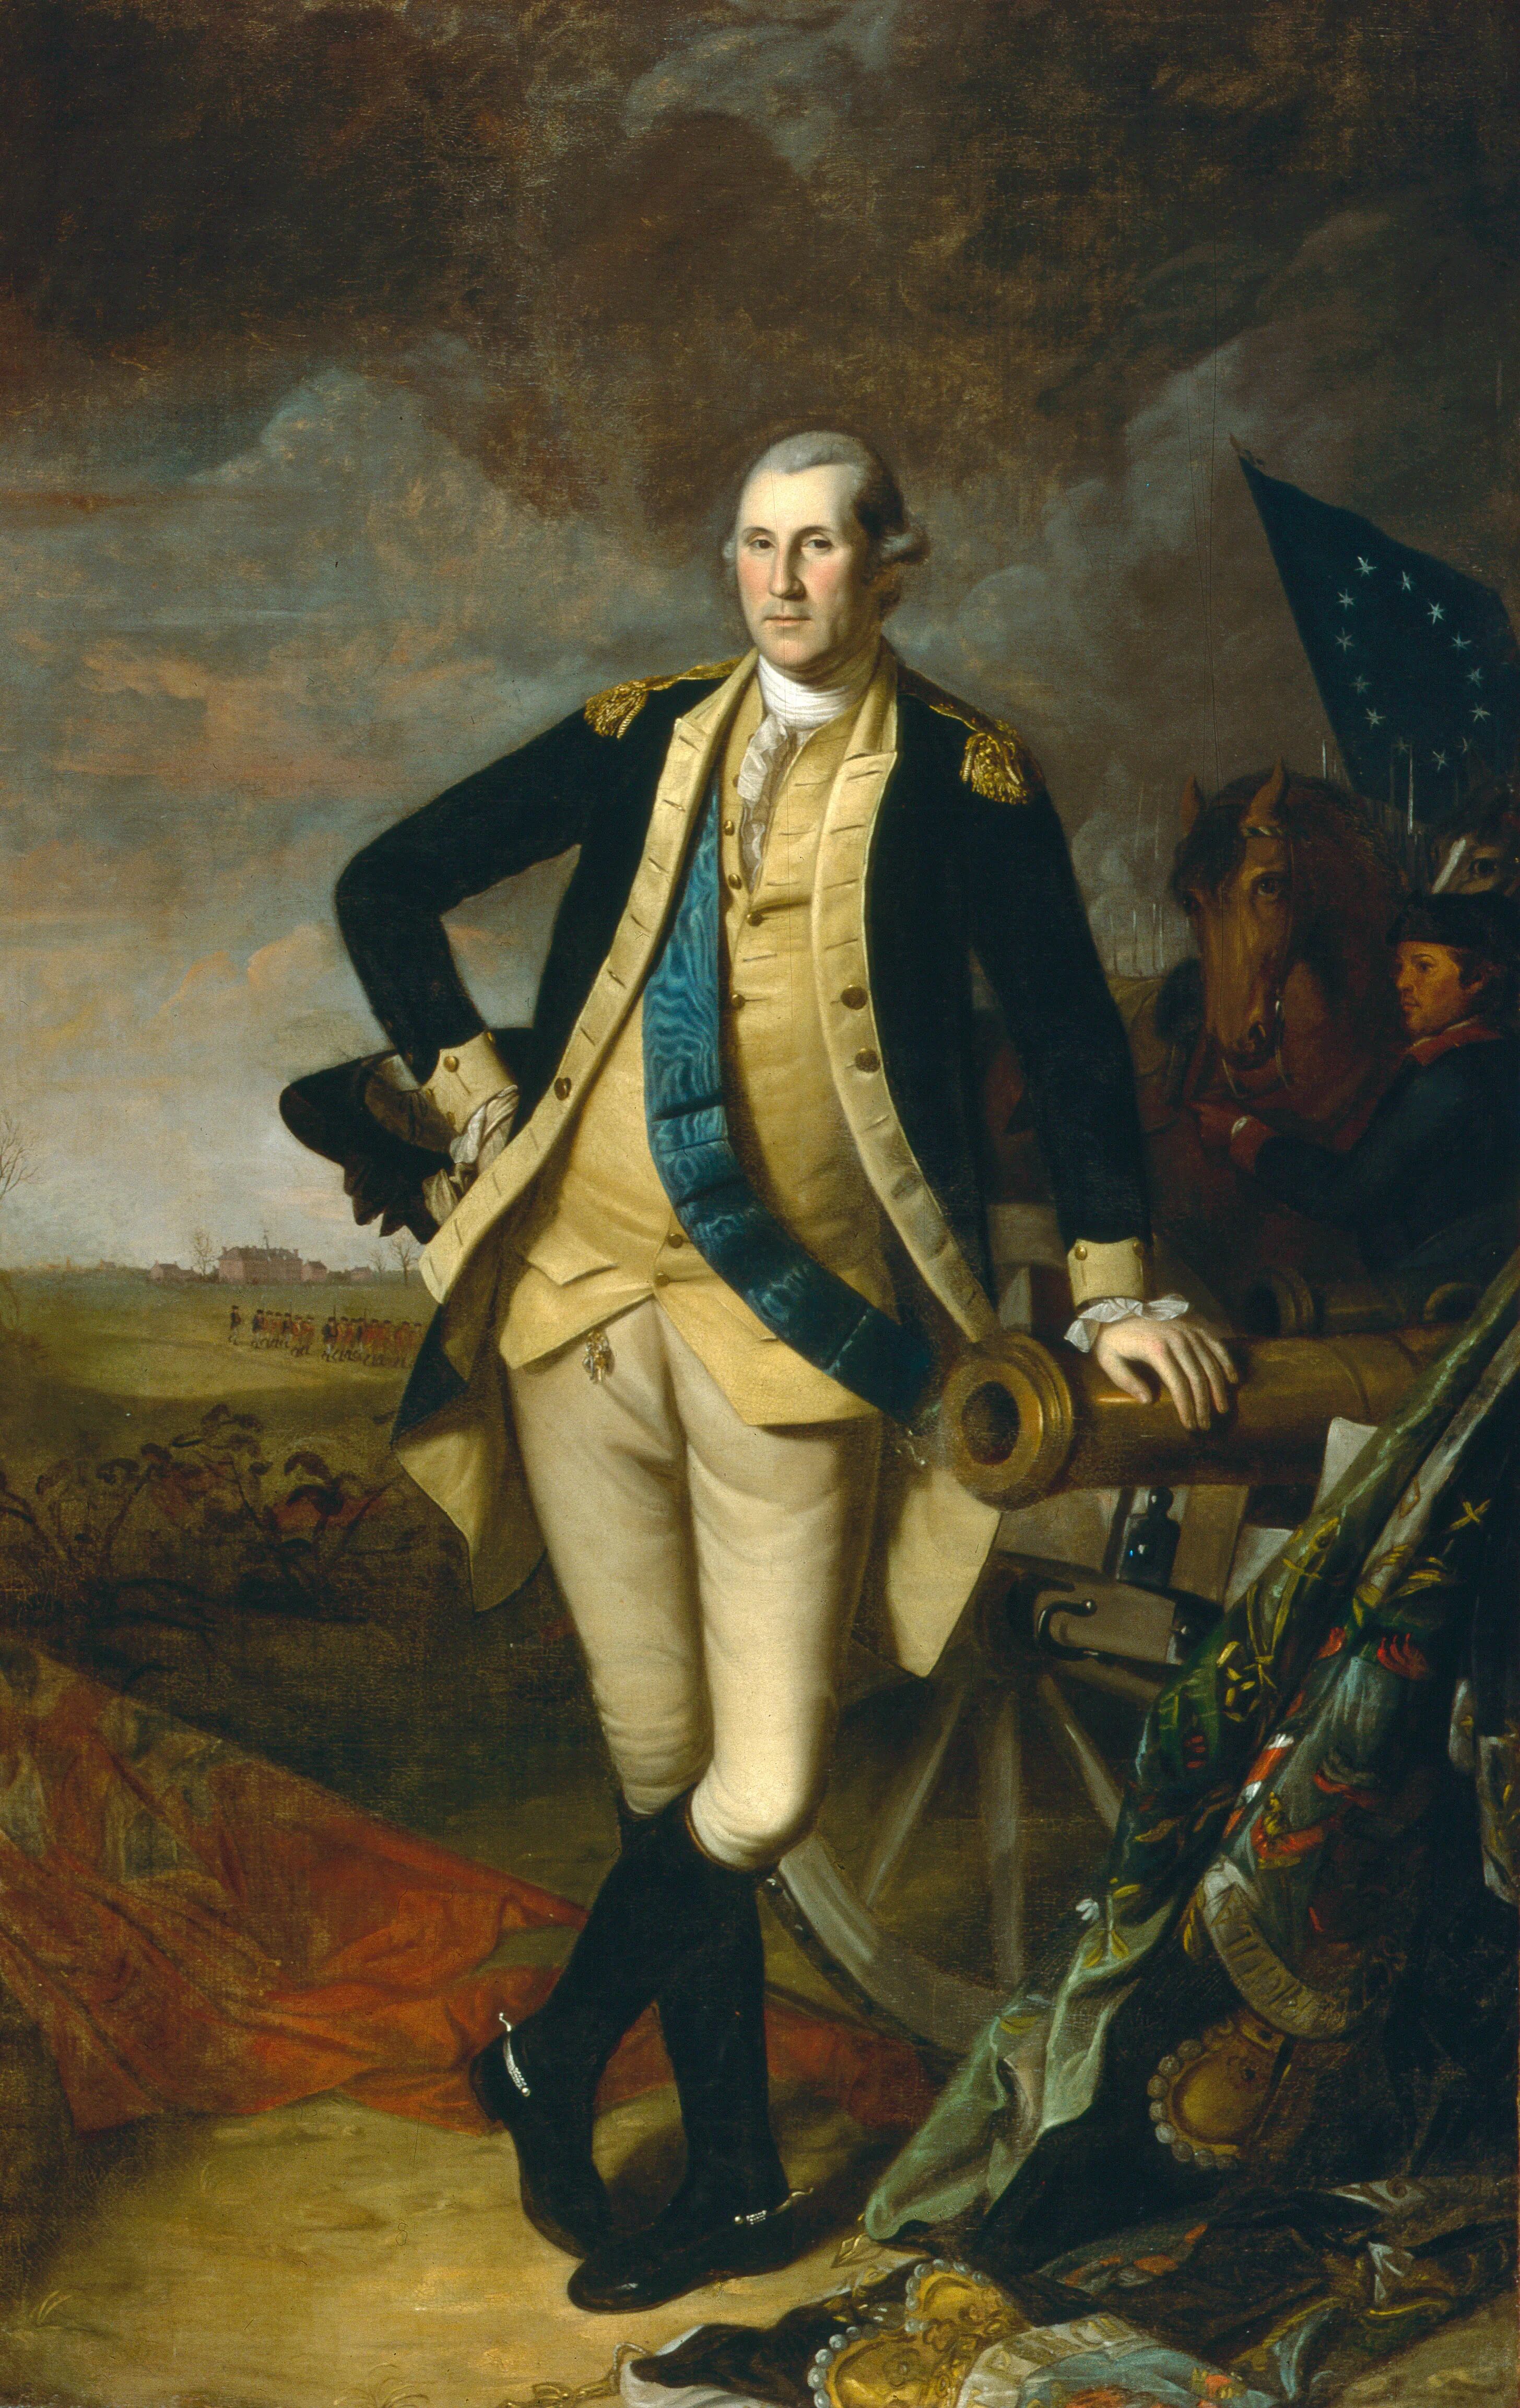 Charles Willson Peale’s portrait of Washington shows him after the Battle of Trenton. The painting is a part of PAFA's ongoing show.